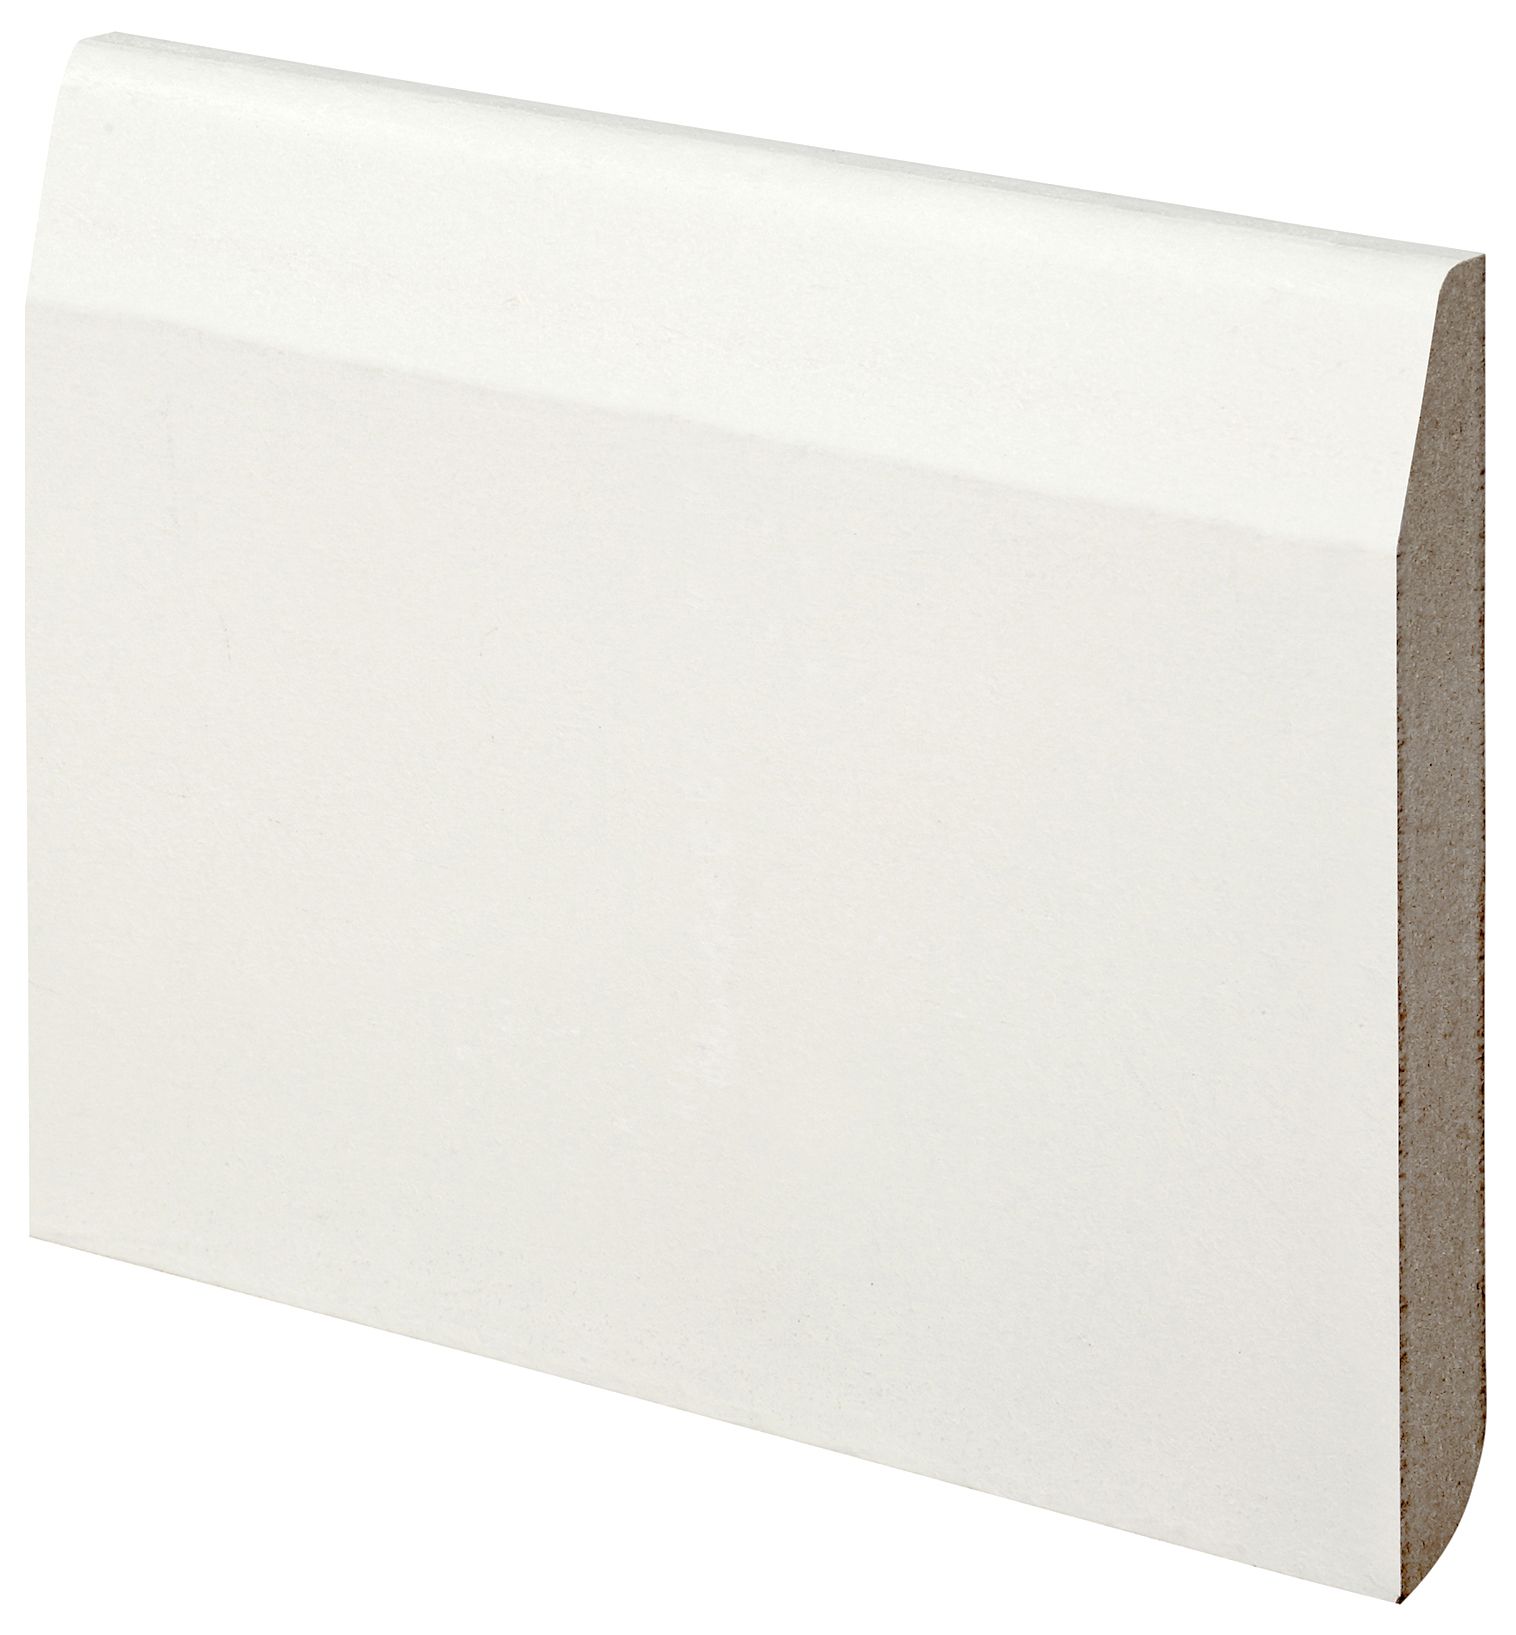 Image of Wickes Dual Purpose Chamfered/Bullnose Primed MDF Skirting - 18 x 119 x 3660mm - Pack of 2